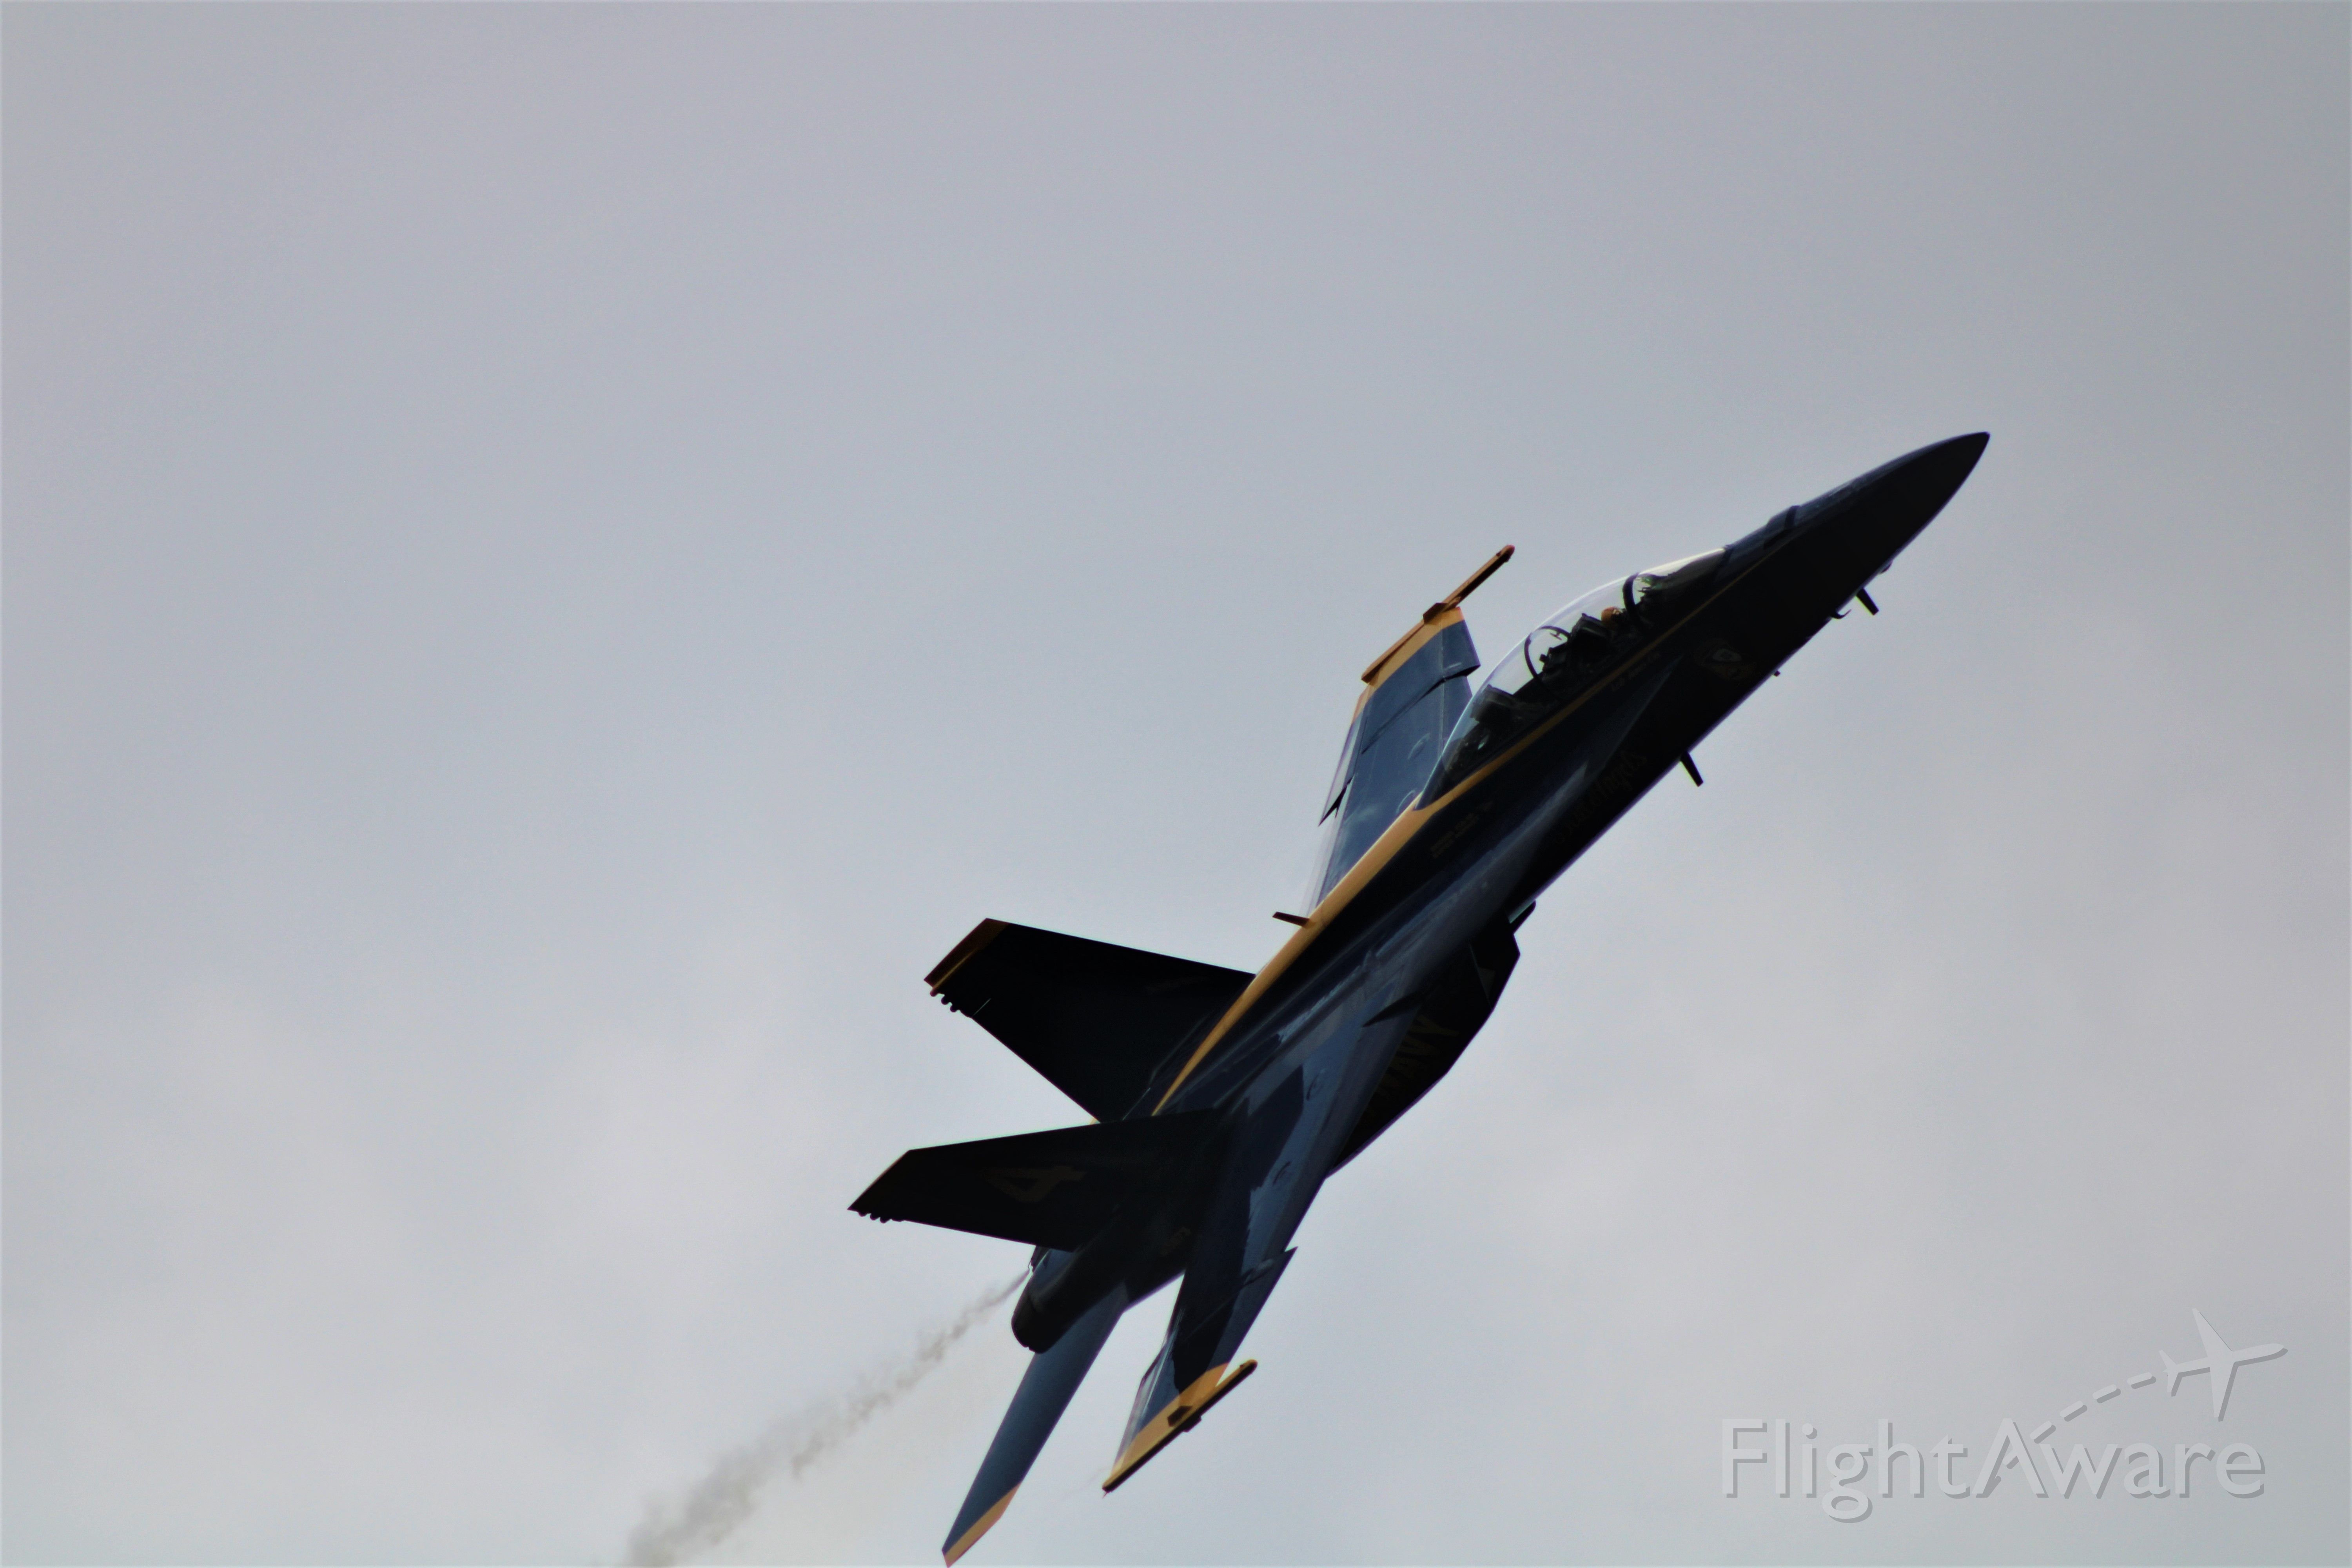 — — - Blue Angels Performancebr /Kansas City Airshow, July 3, 2021br /Bright and hazy conditions. 